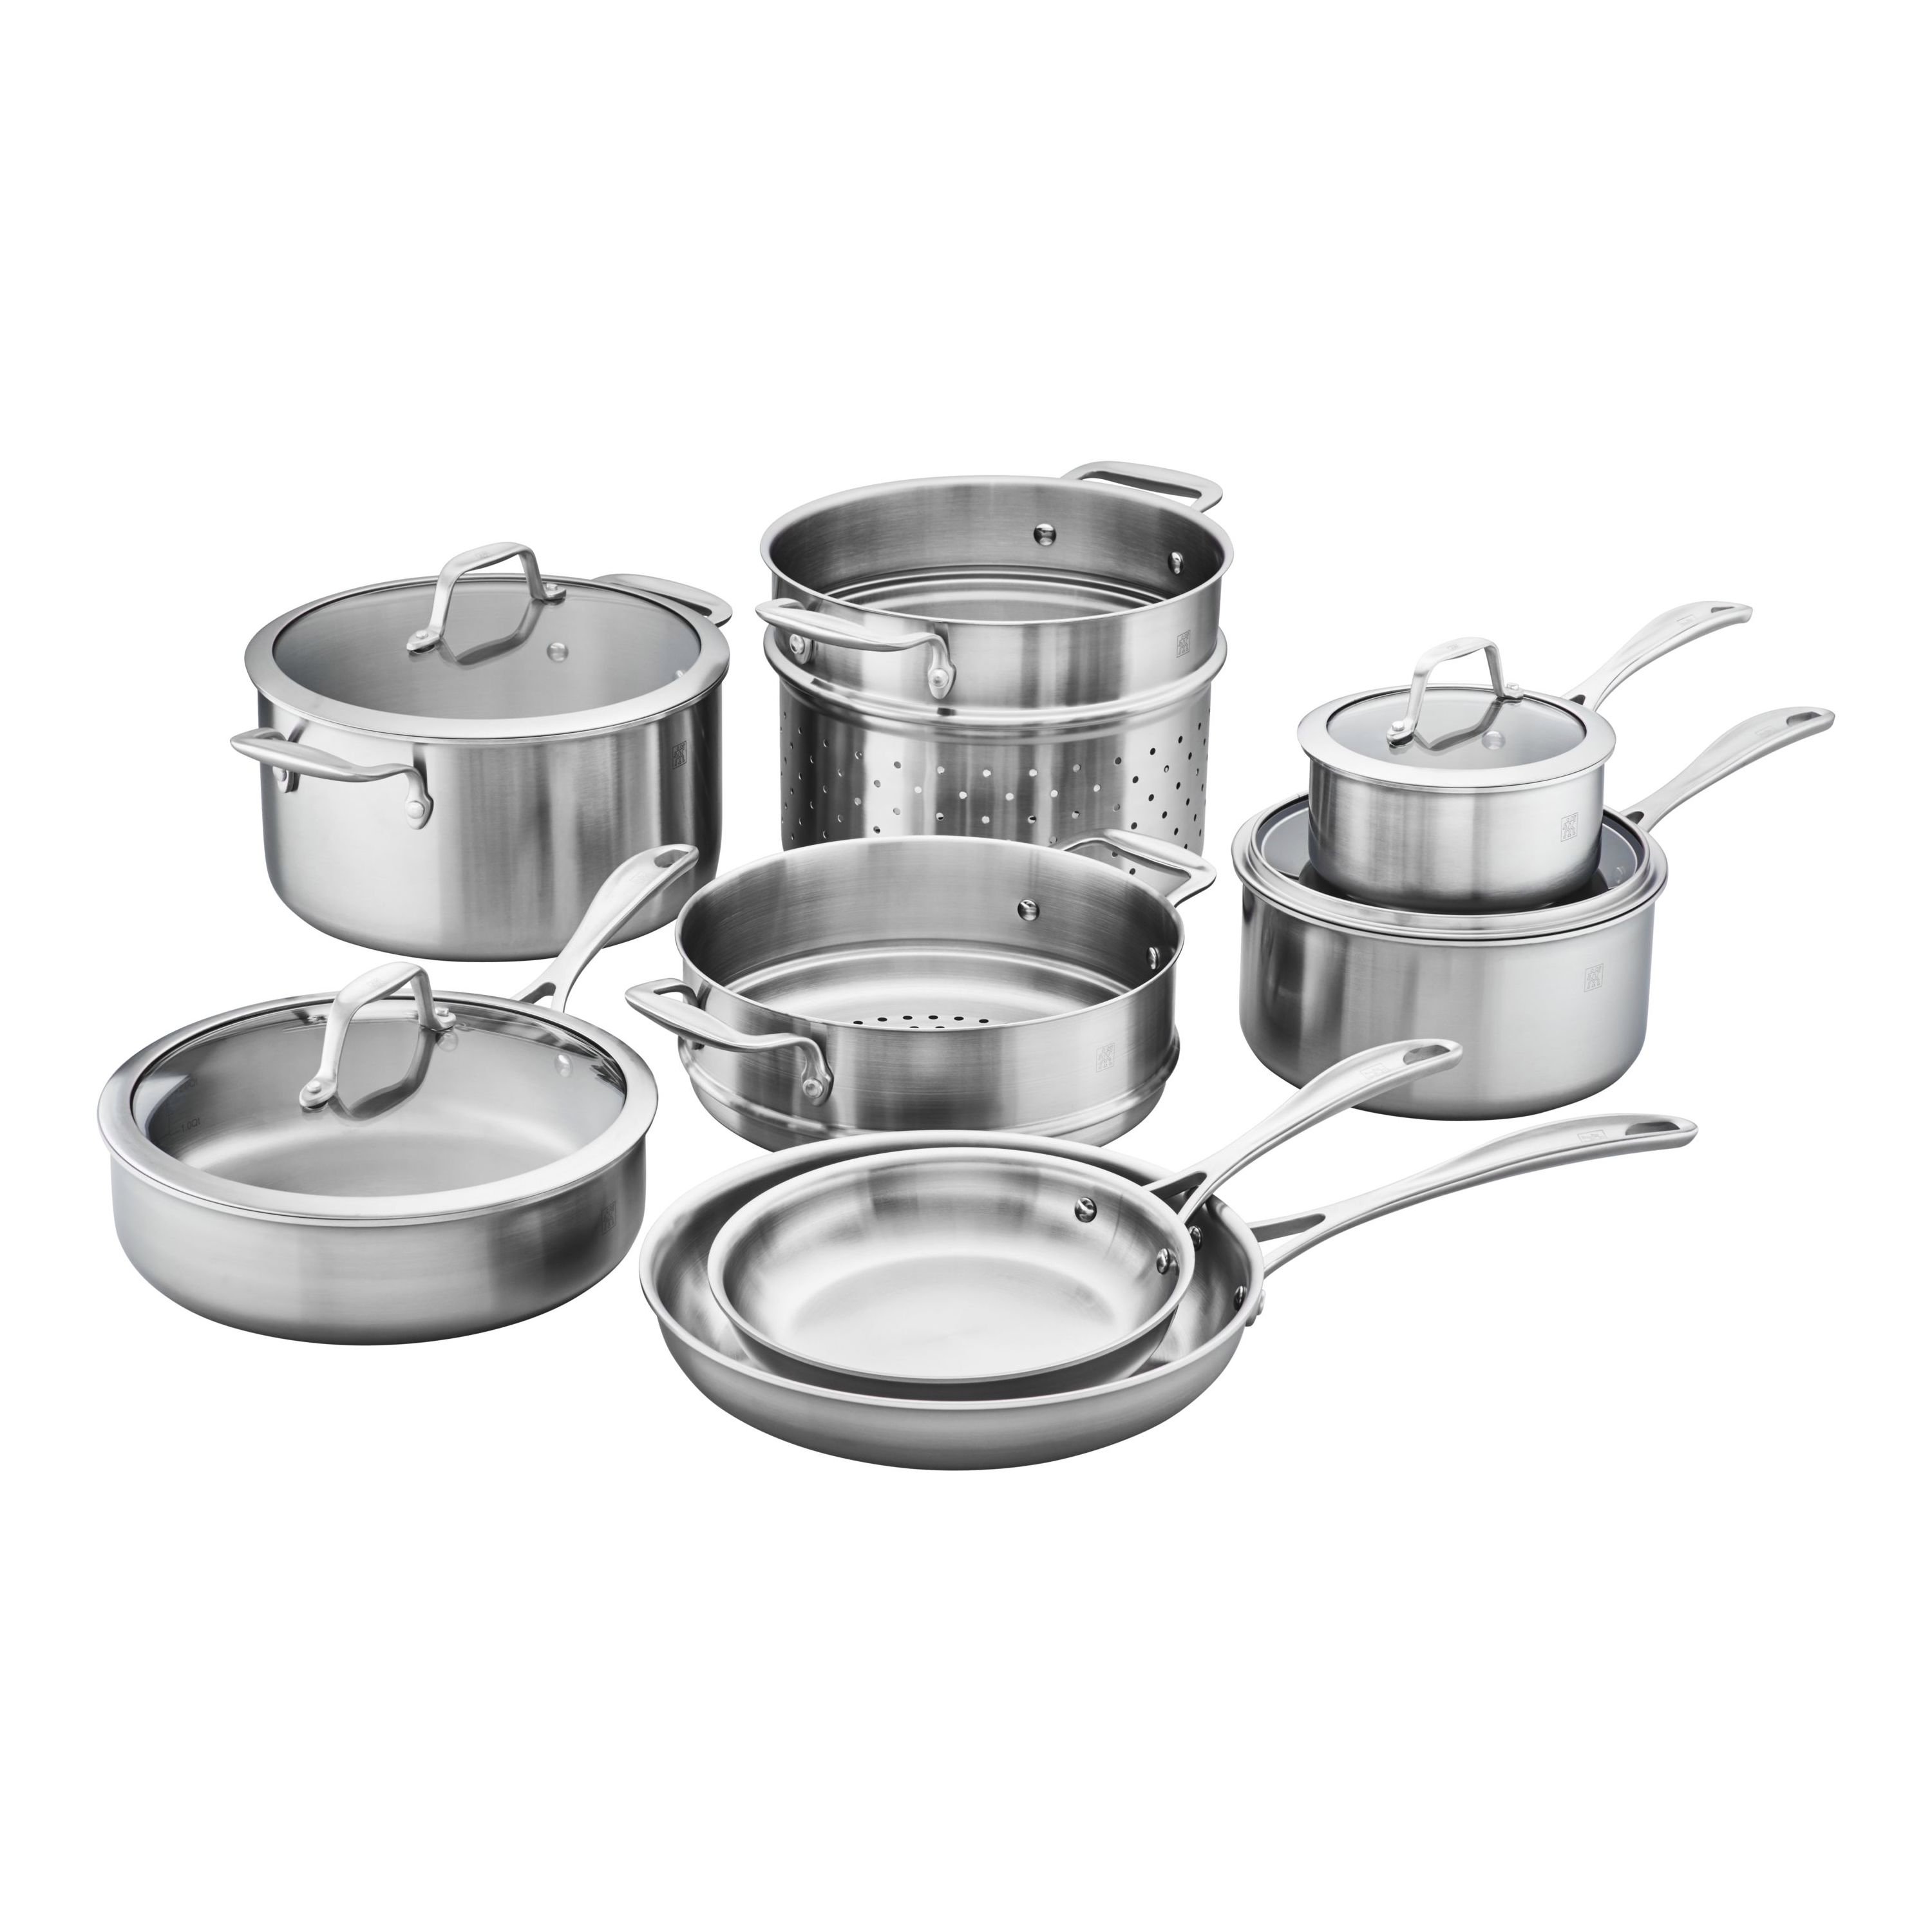 Zwilling Spirit 3-Ply 4-Qt Stainless Steel Covered Saucepan